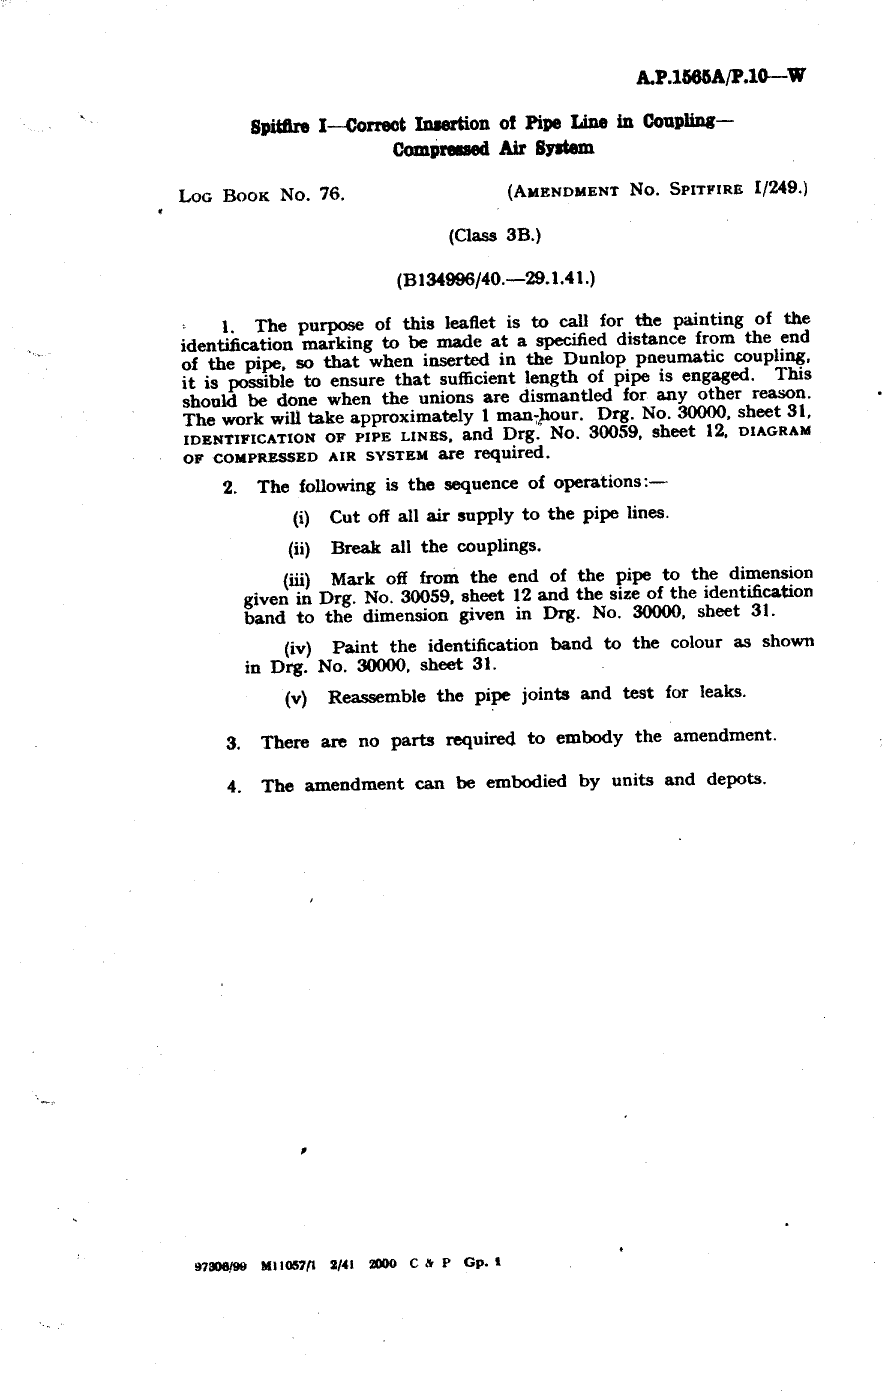 Sample page 1 from AirCorps Library document: Spitfire I Correct Insertion of Pipe Line in Coupling Compressed Air System